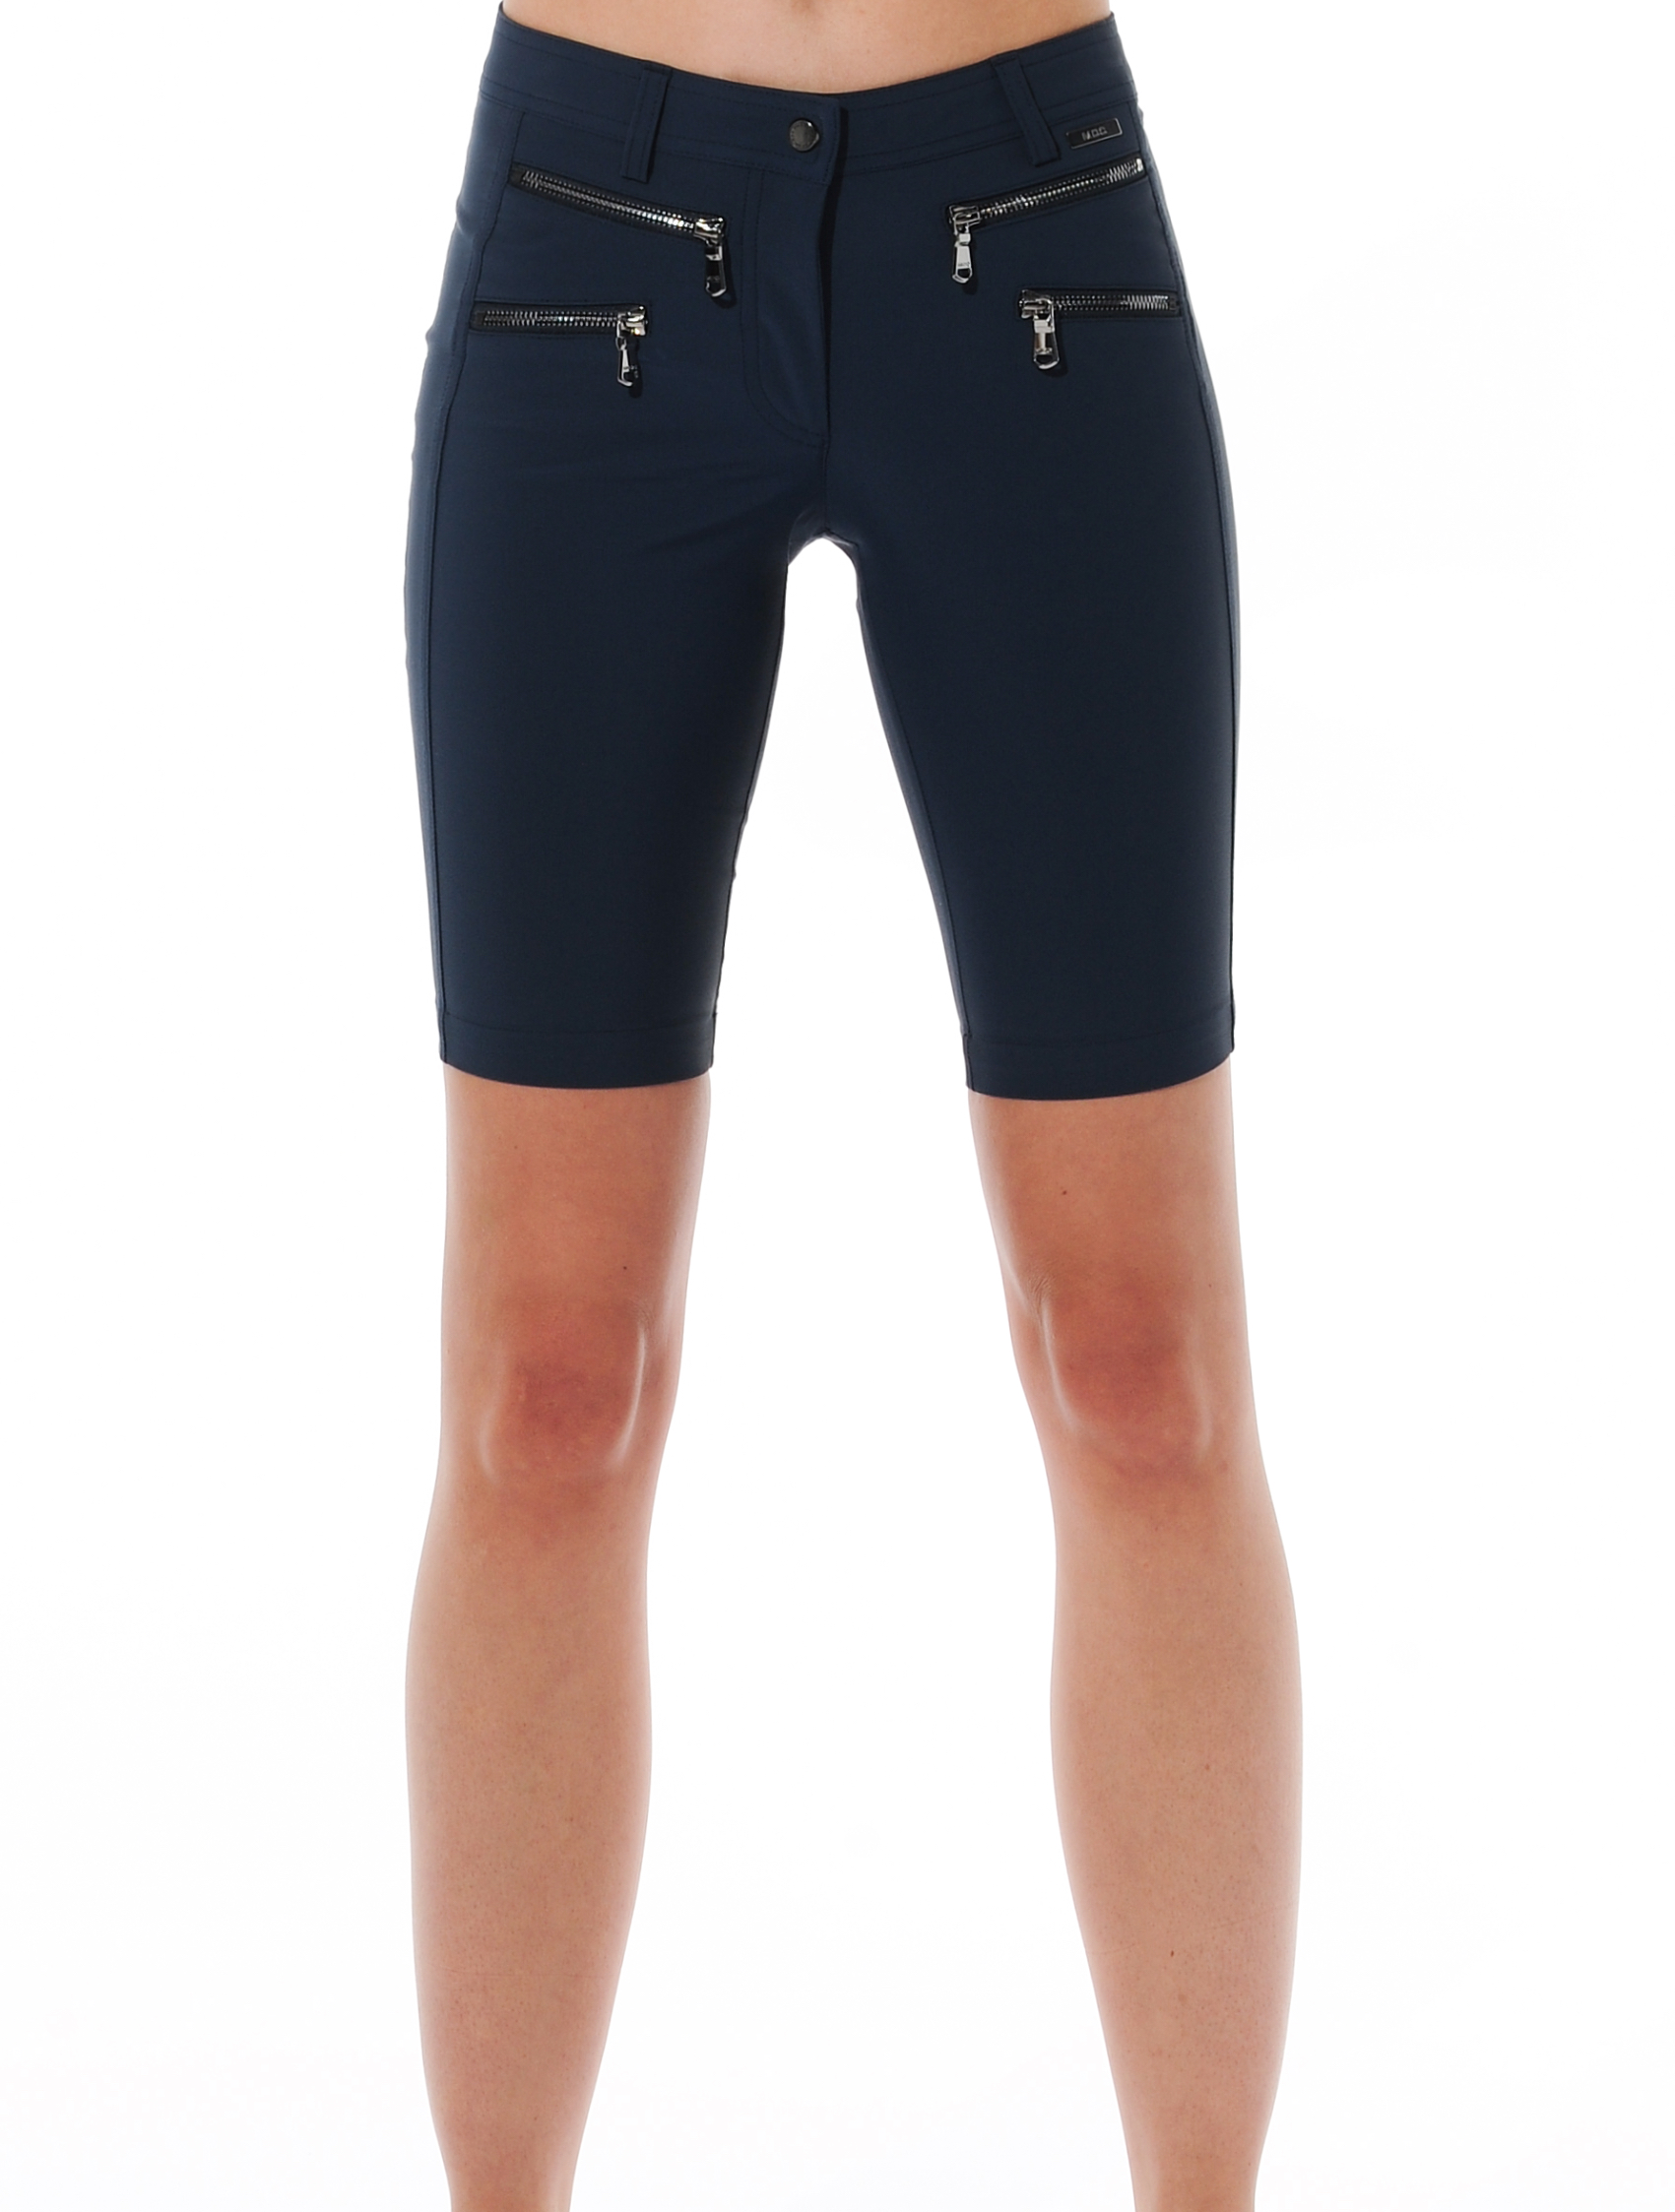 4way stretch double zip shorts navy 